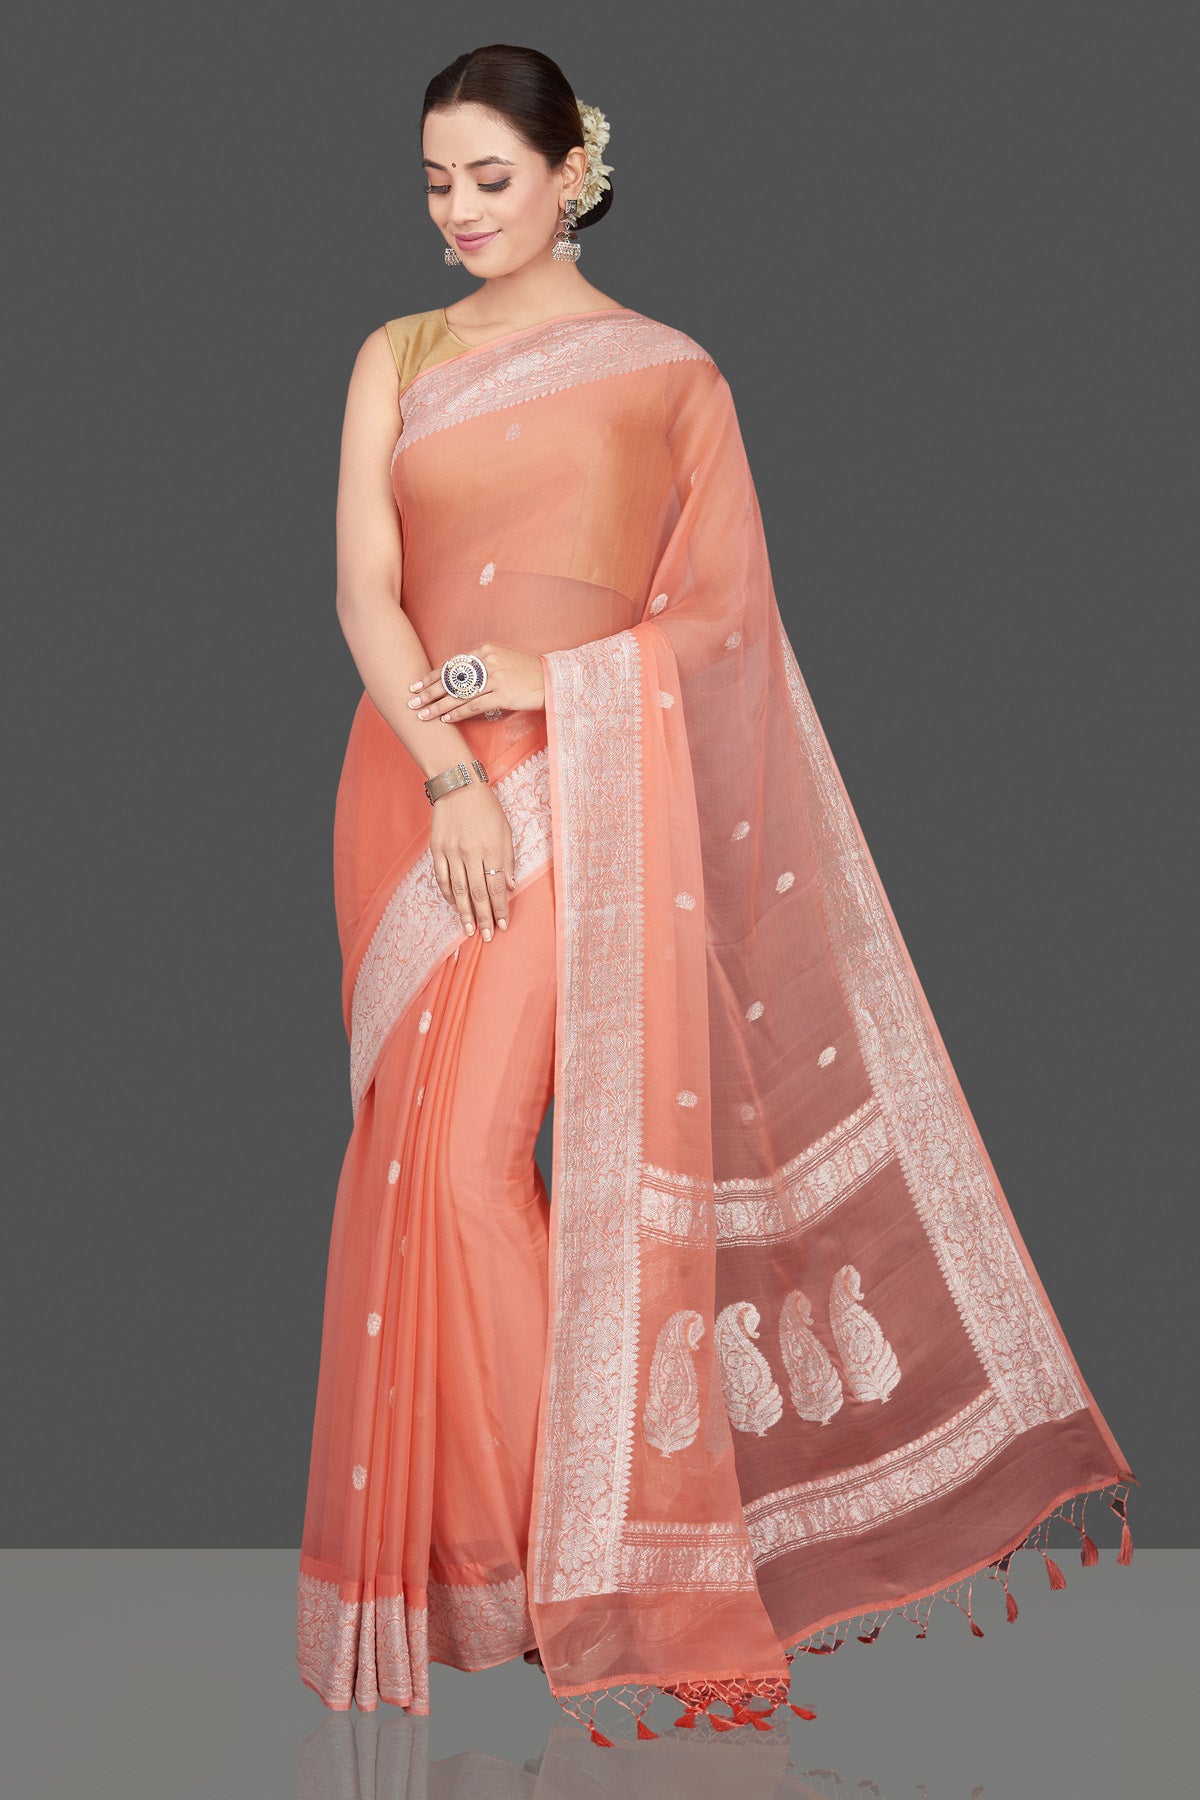 Buy stunning peach color georgette chiffon saree online in USA with silver zari border. Go for stunning Indian designer sarees, georgette sarees, handwoven sarees, embroidered sarees for festive occasions and weddings from Pure Elegance Indian clothing store in USA.-full view